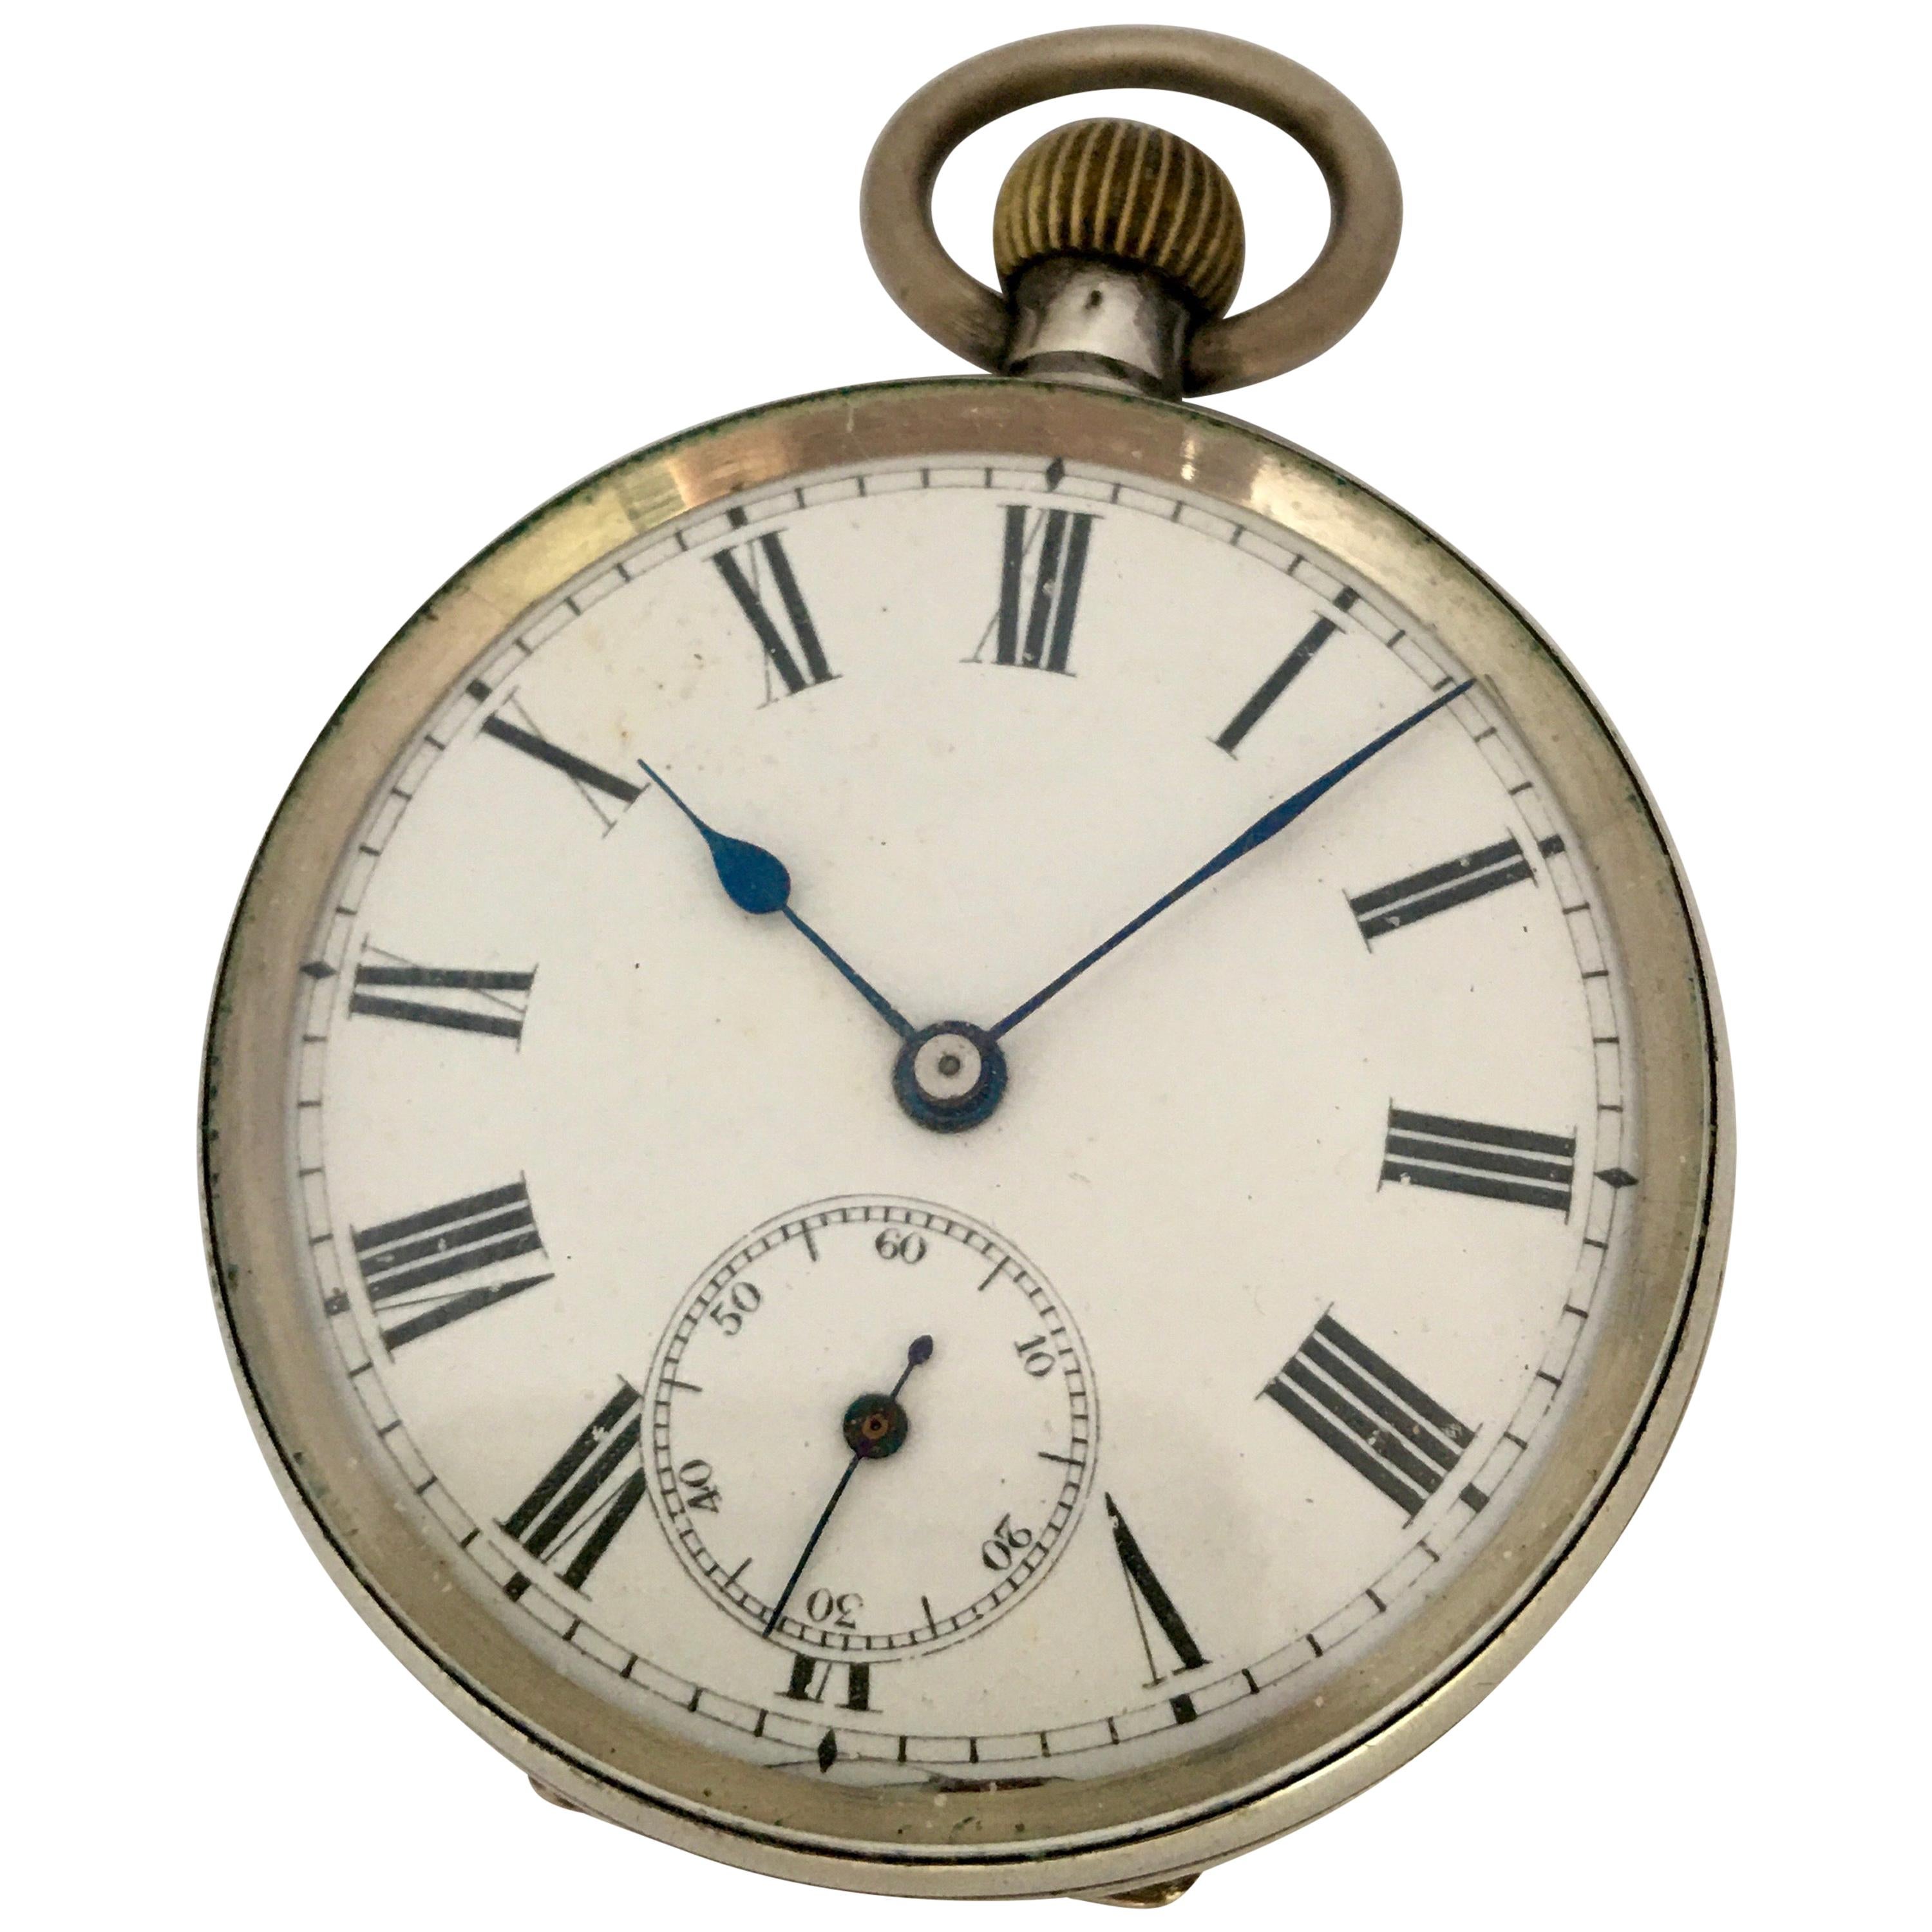 Antique Silver Hand-Winding Pocket Watch